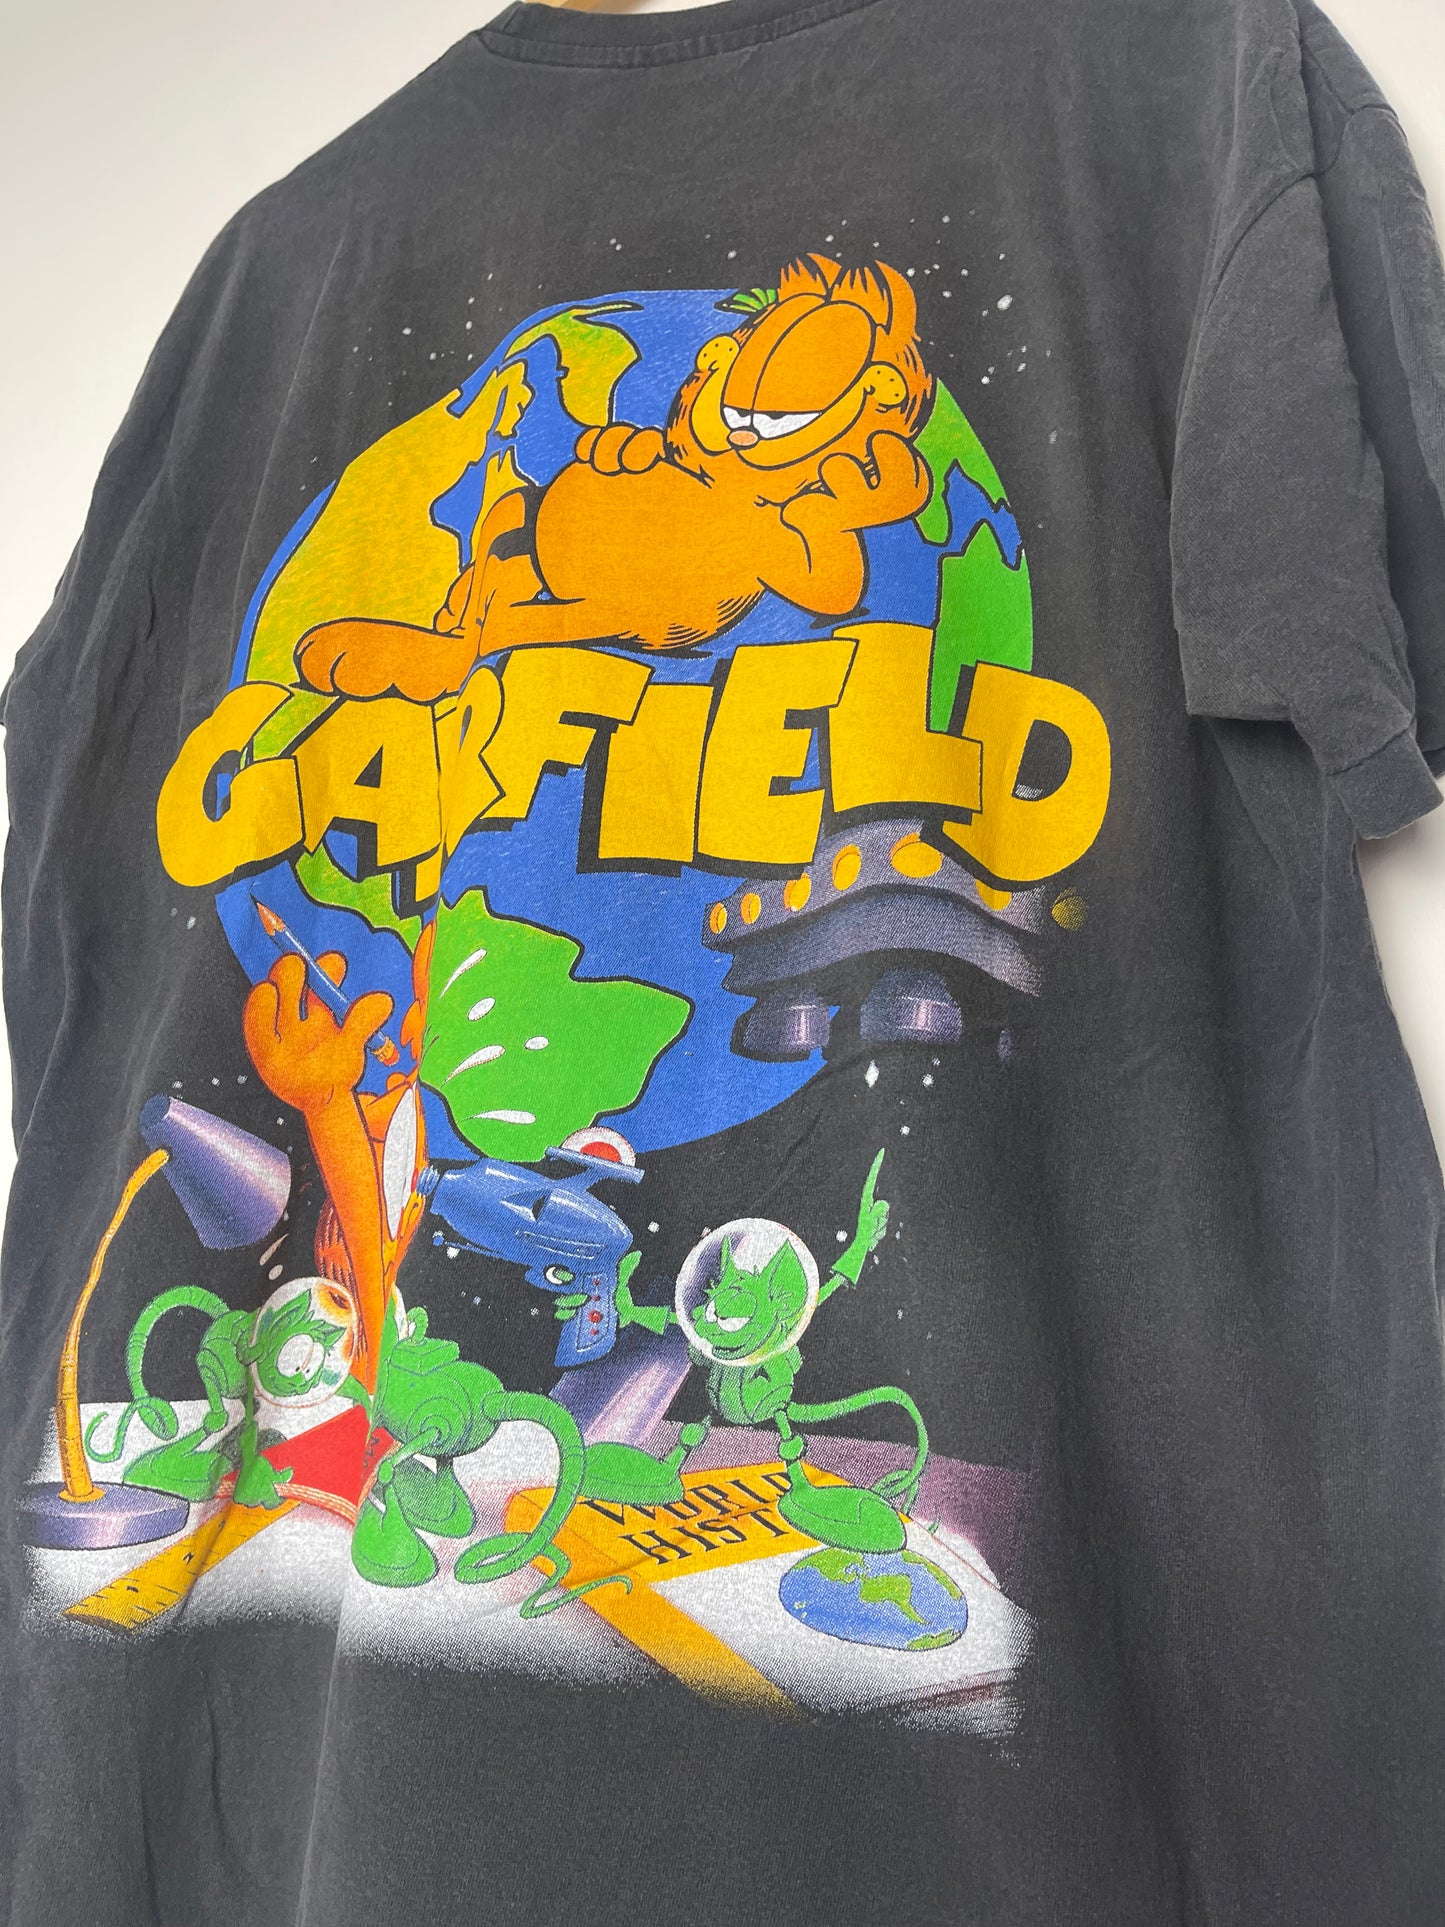 Vintage Style Garfield T-shirt - X Large